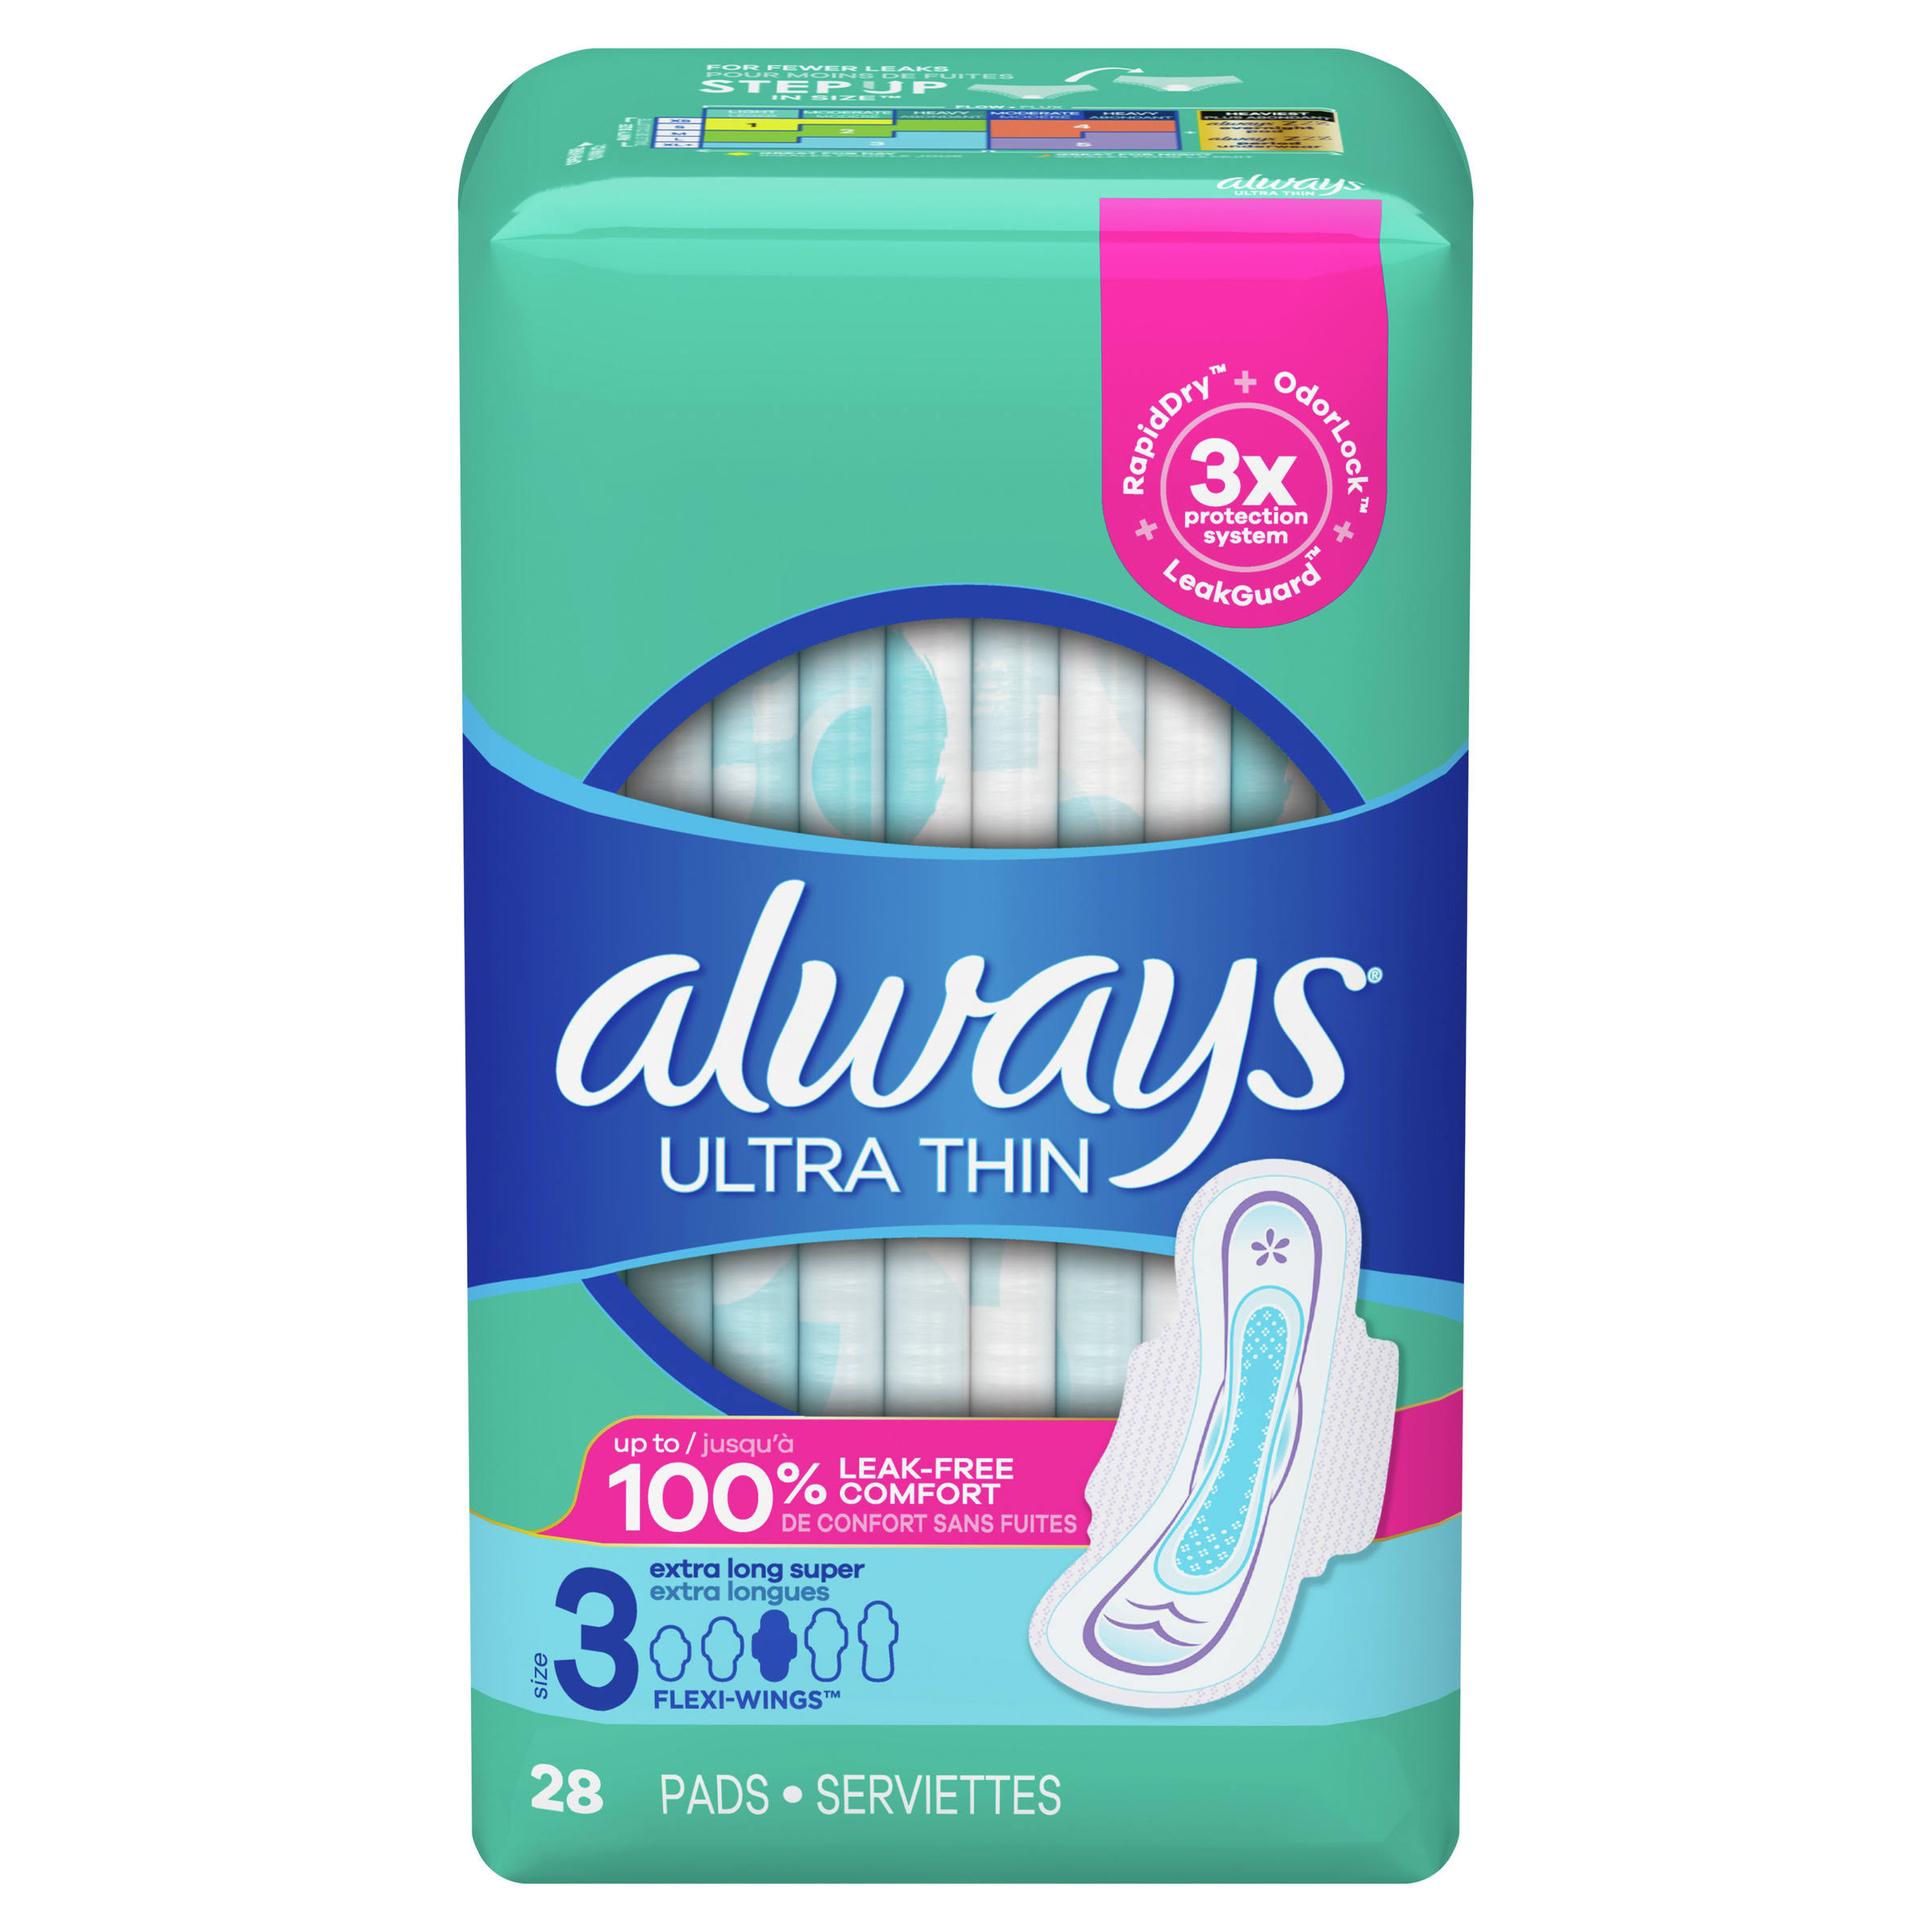 Always Ultra Thin Pads - 28 Pads, Size 3